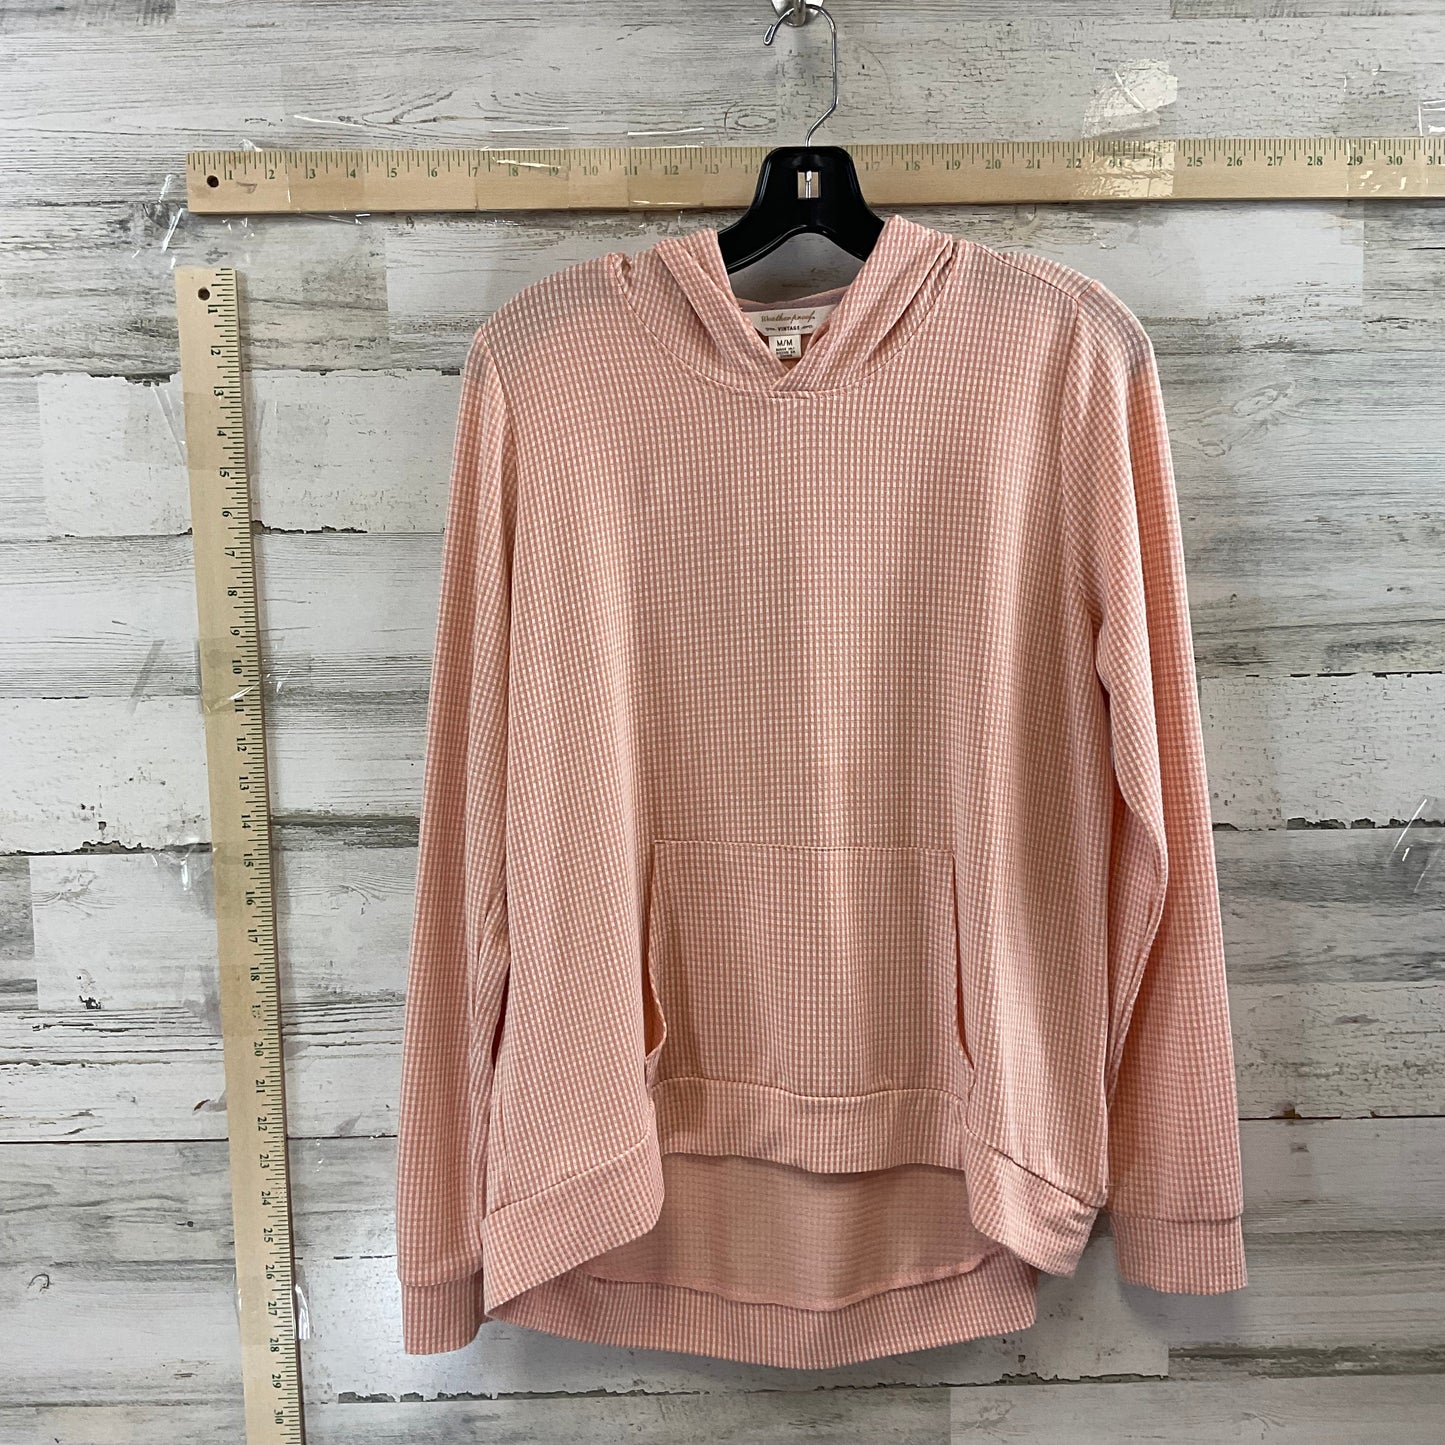 Top Long Sleeve Basic By Weatherproof  Size: M